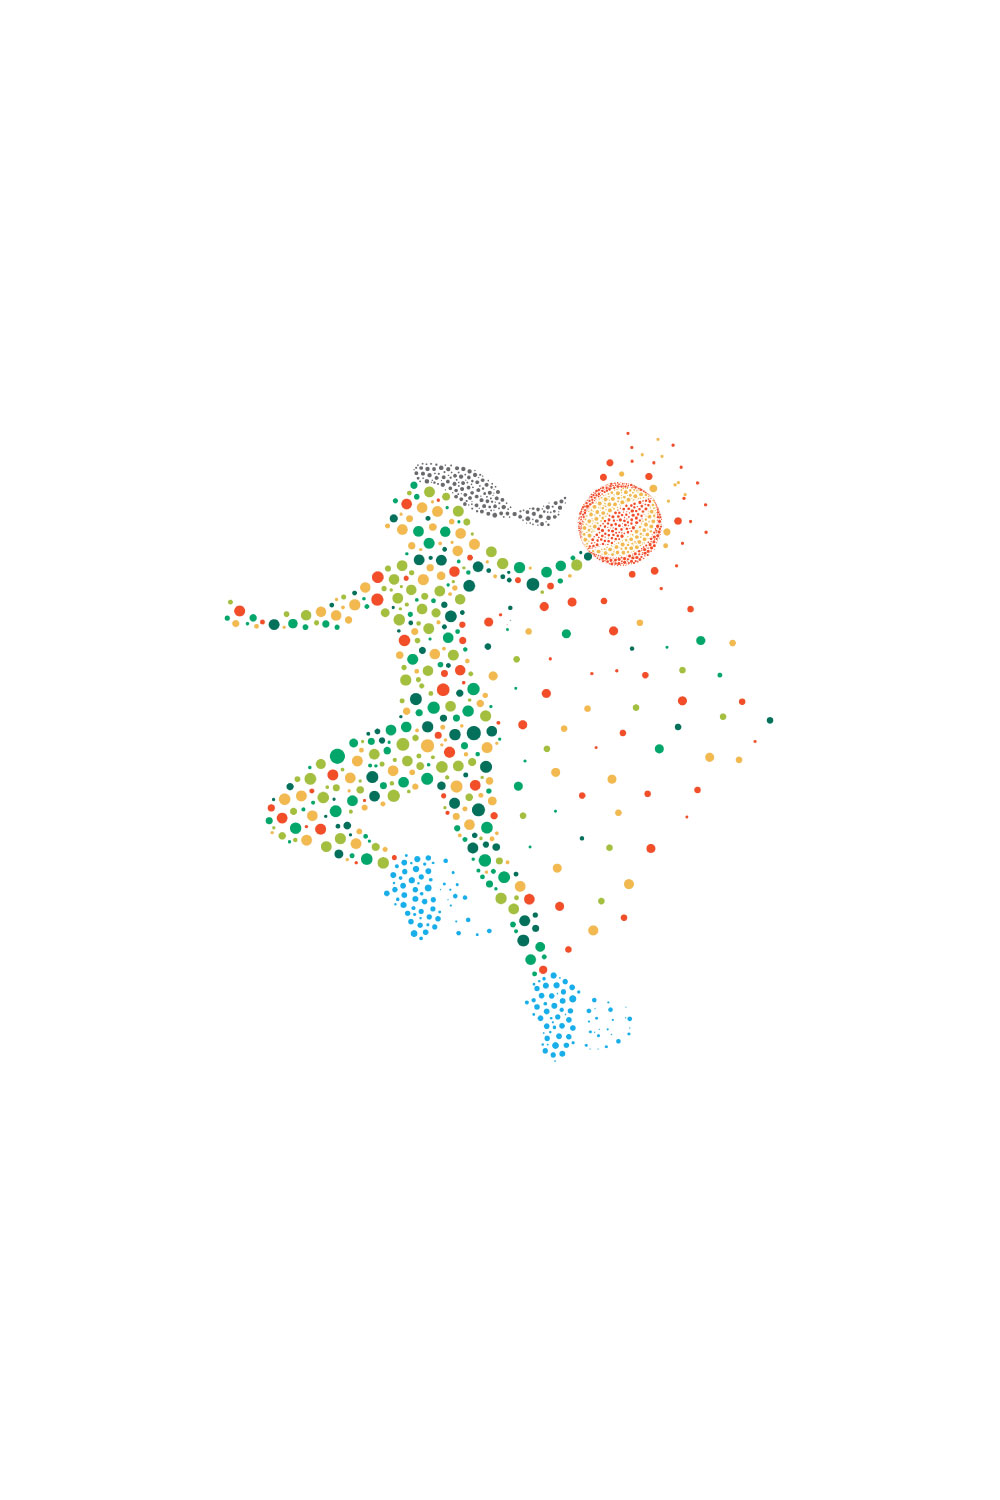 Basketball throwing is composed of colored dots, vector illustration pinterest preview image.